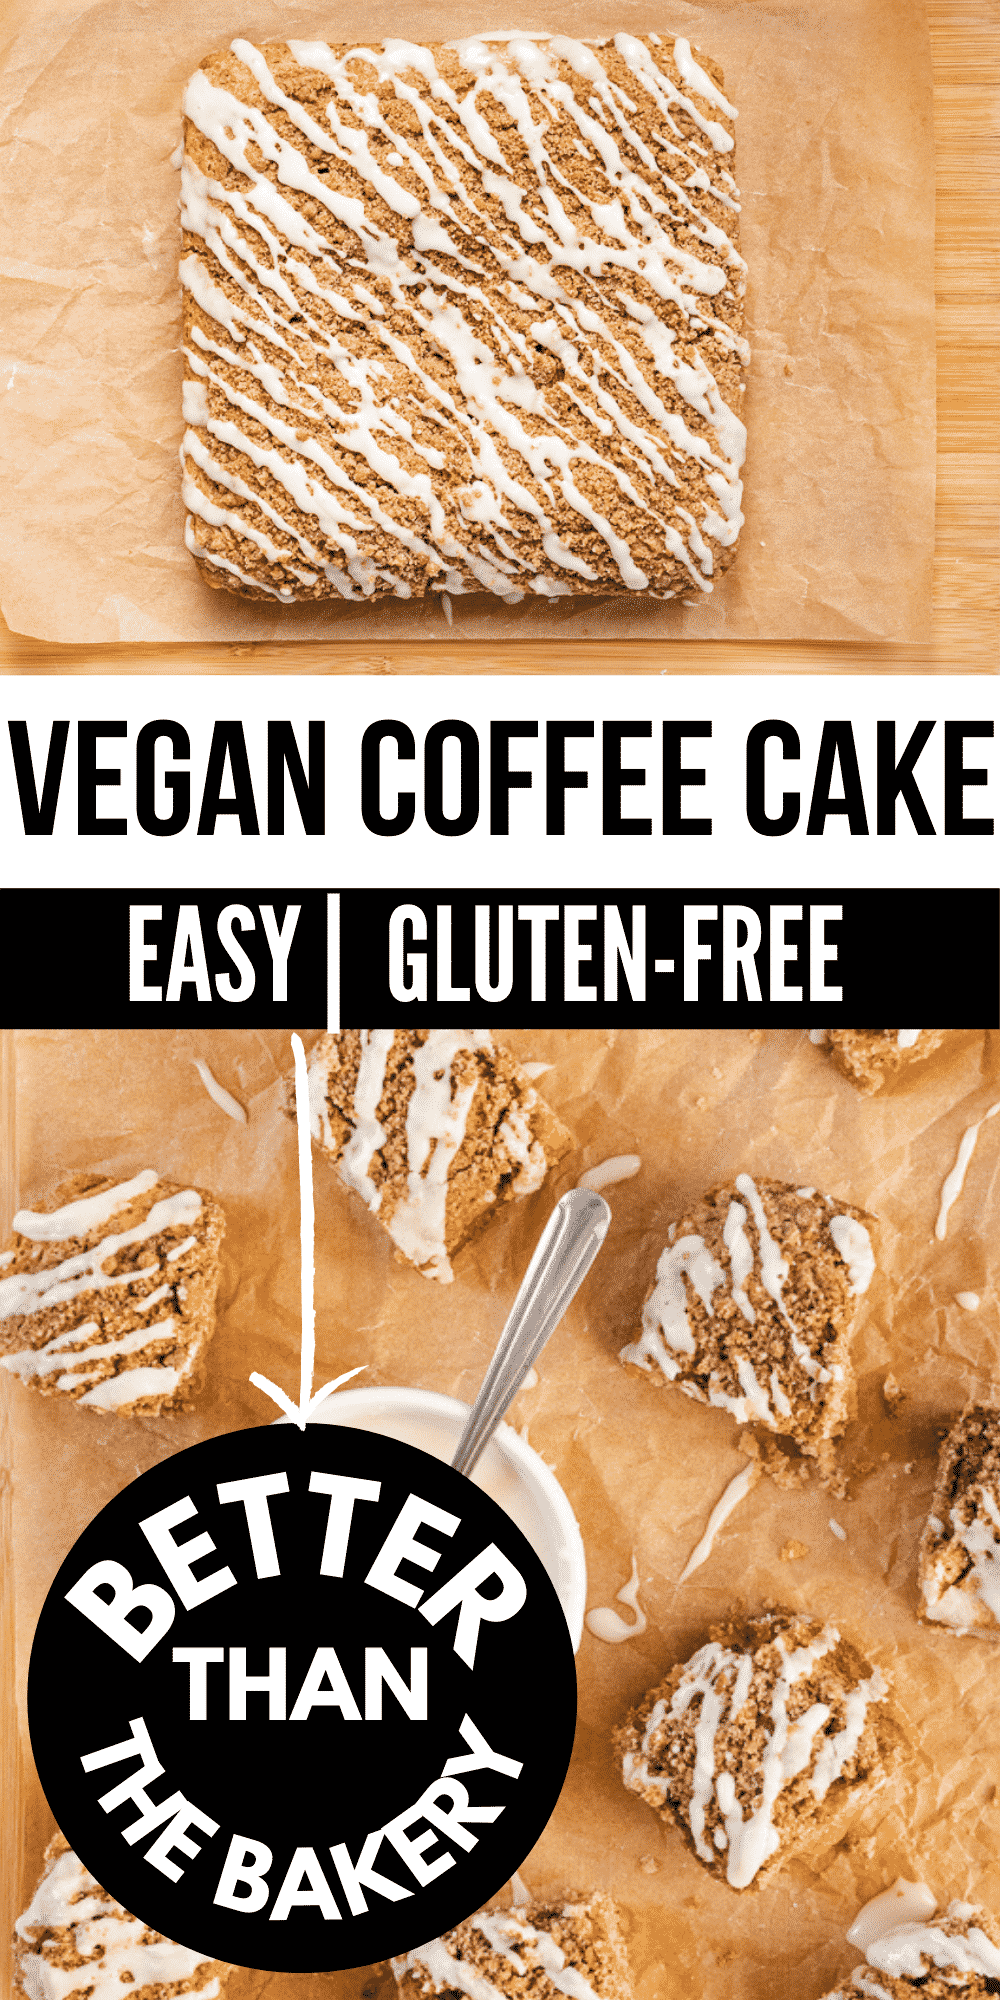 Vegan Coffee Cake is so easy to make! Add this simple icing drizzle over the cinnamon streusel topping for the best sweet breakfast treat that's perfect for holiday mornings.